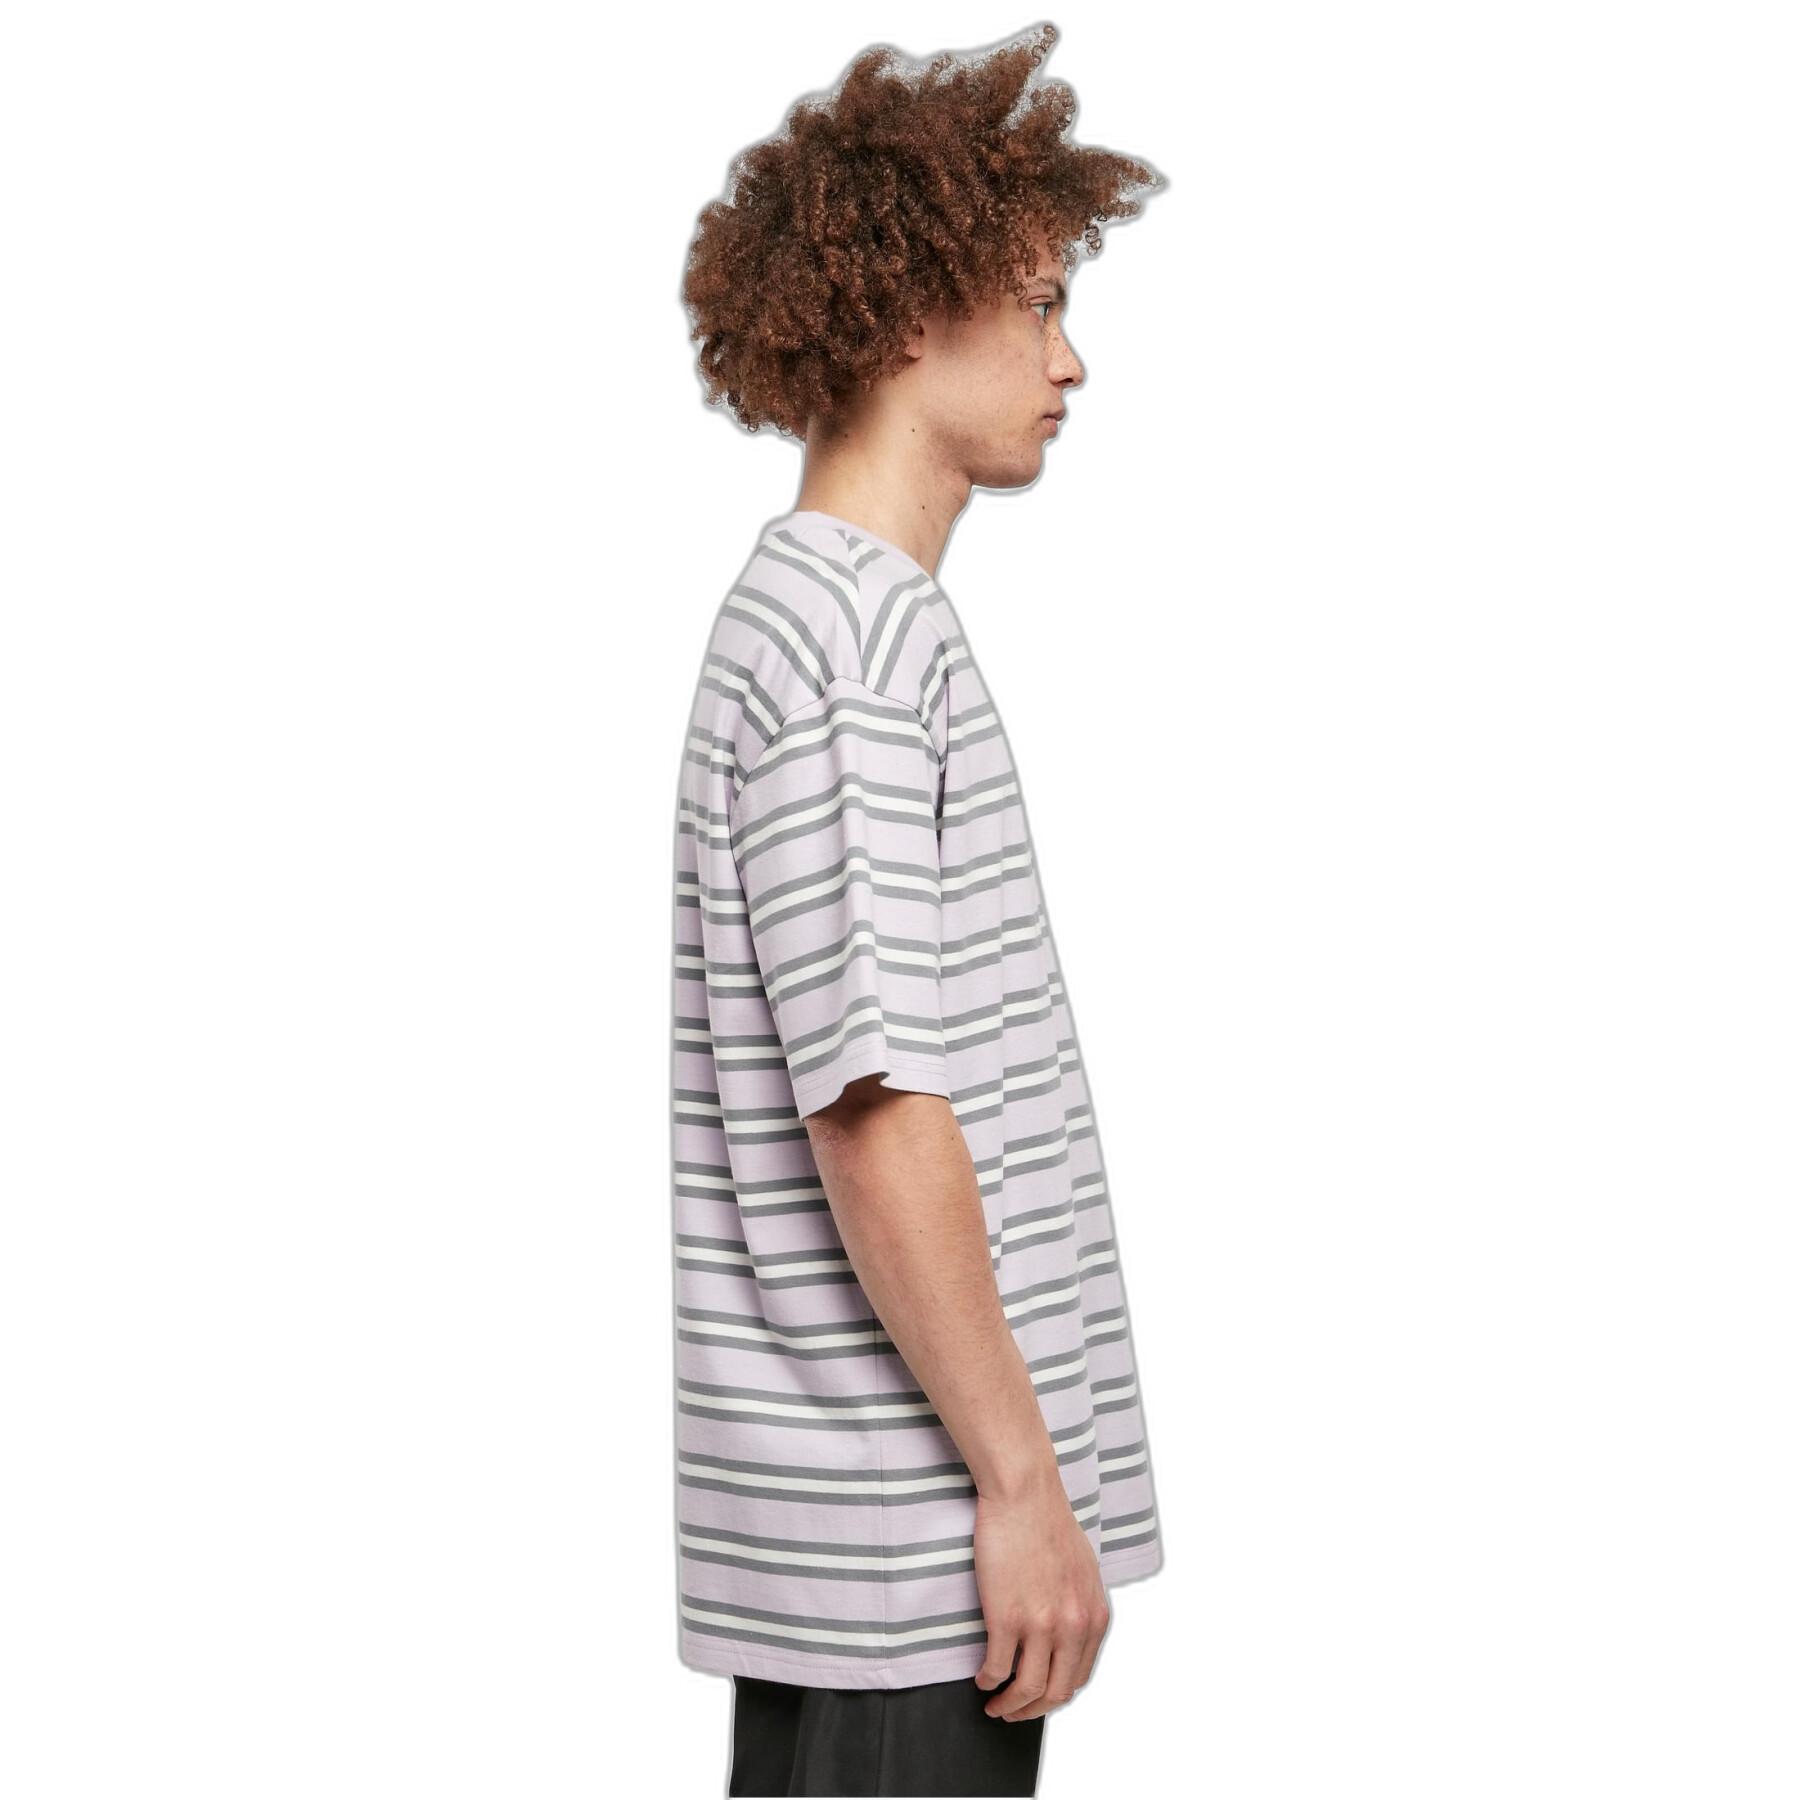 T-shirt oversize a righe Starter Look for the Star